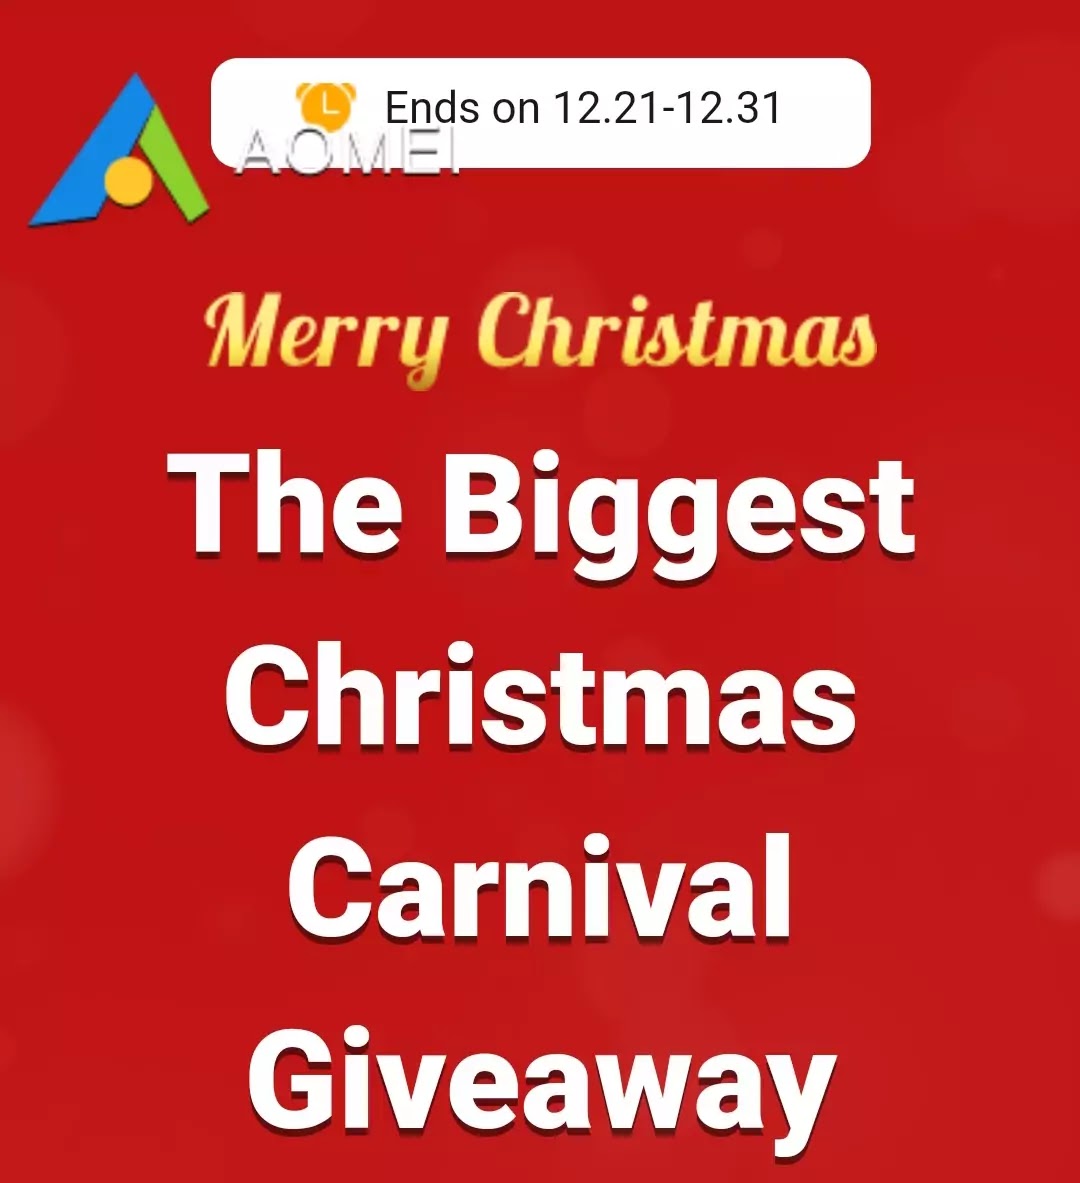 AOMEI-Christmas-Carnival-Giveaway-From-December-21st-to-December-31st